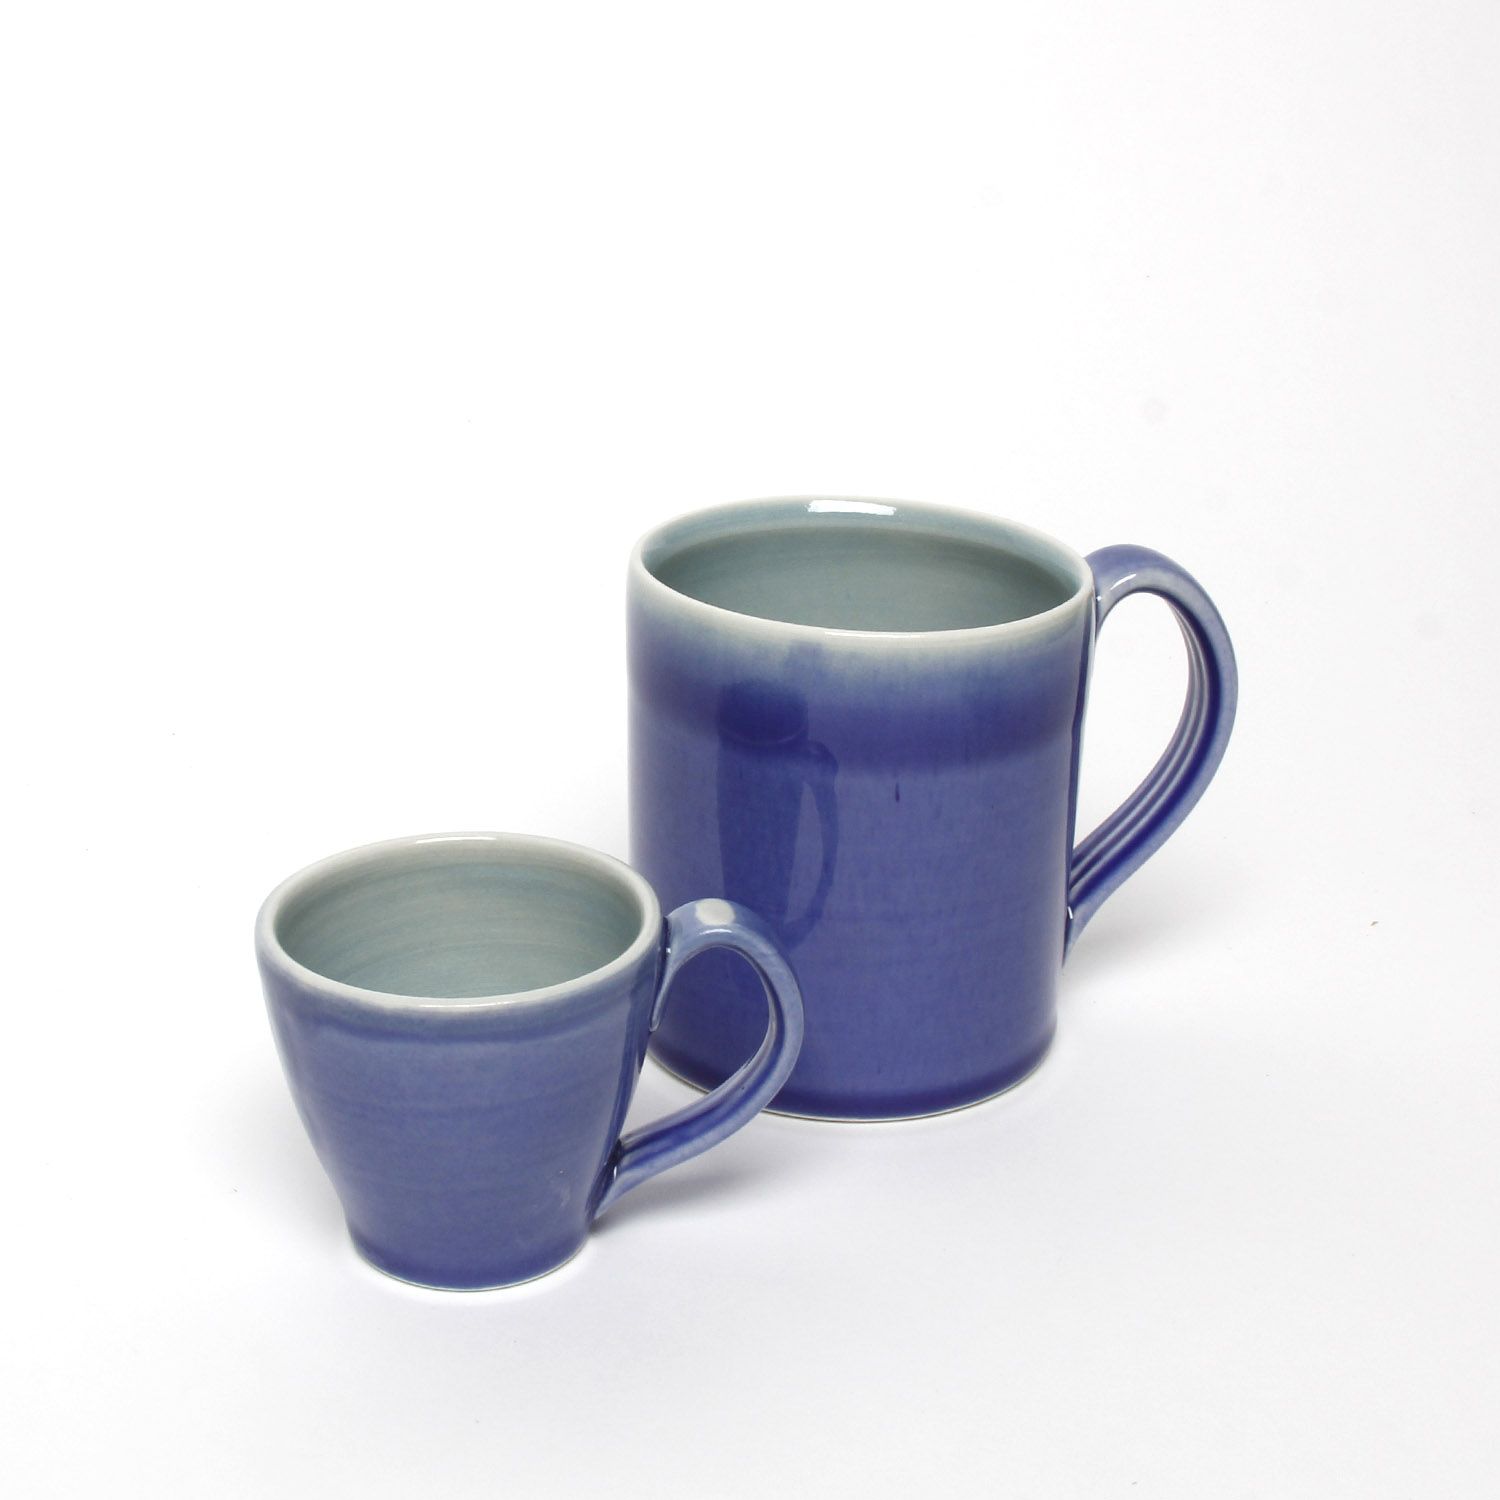 Thomas Aitken: Blue Espresso Cup Product Image 2 of 5